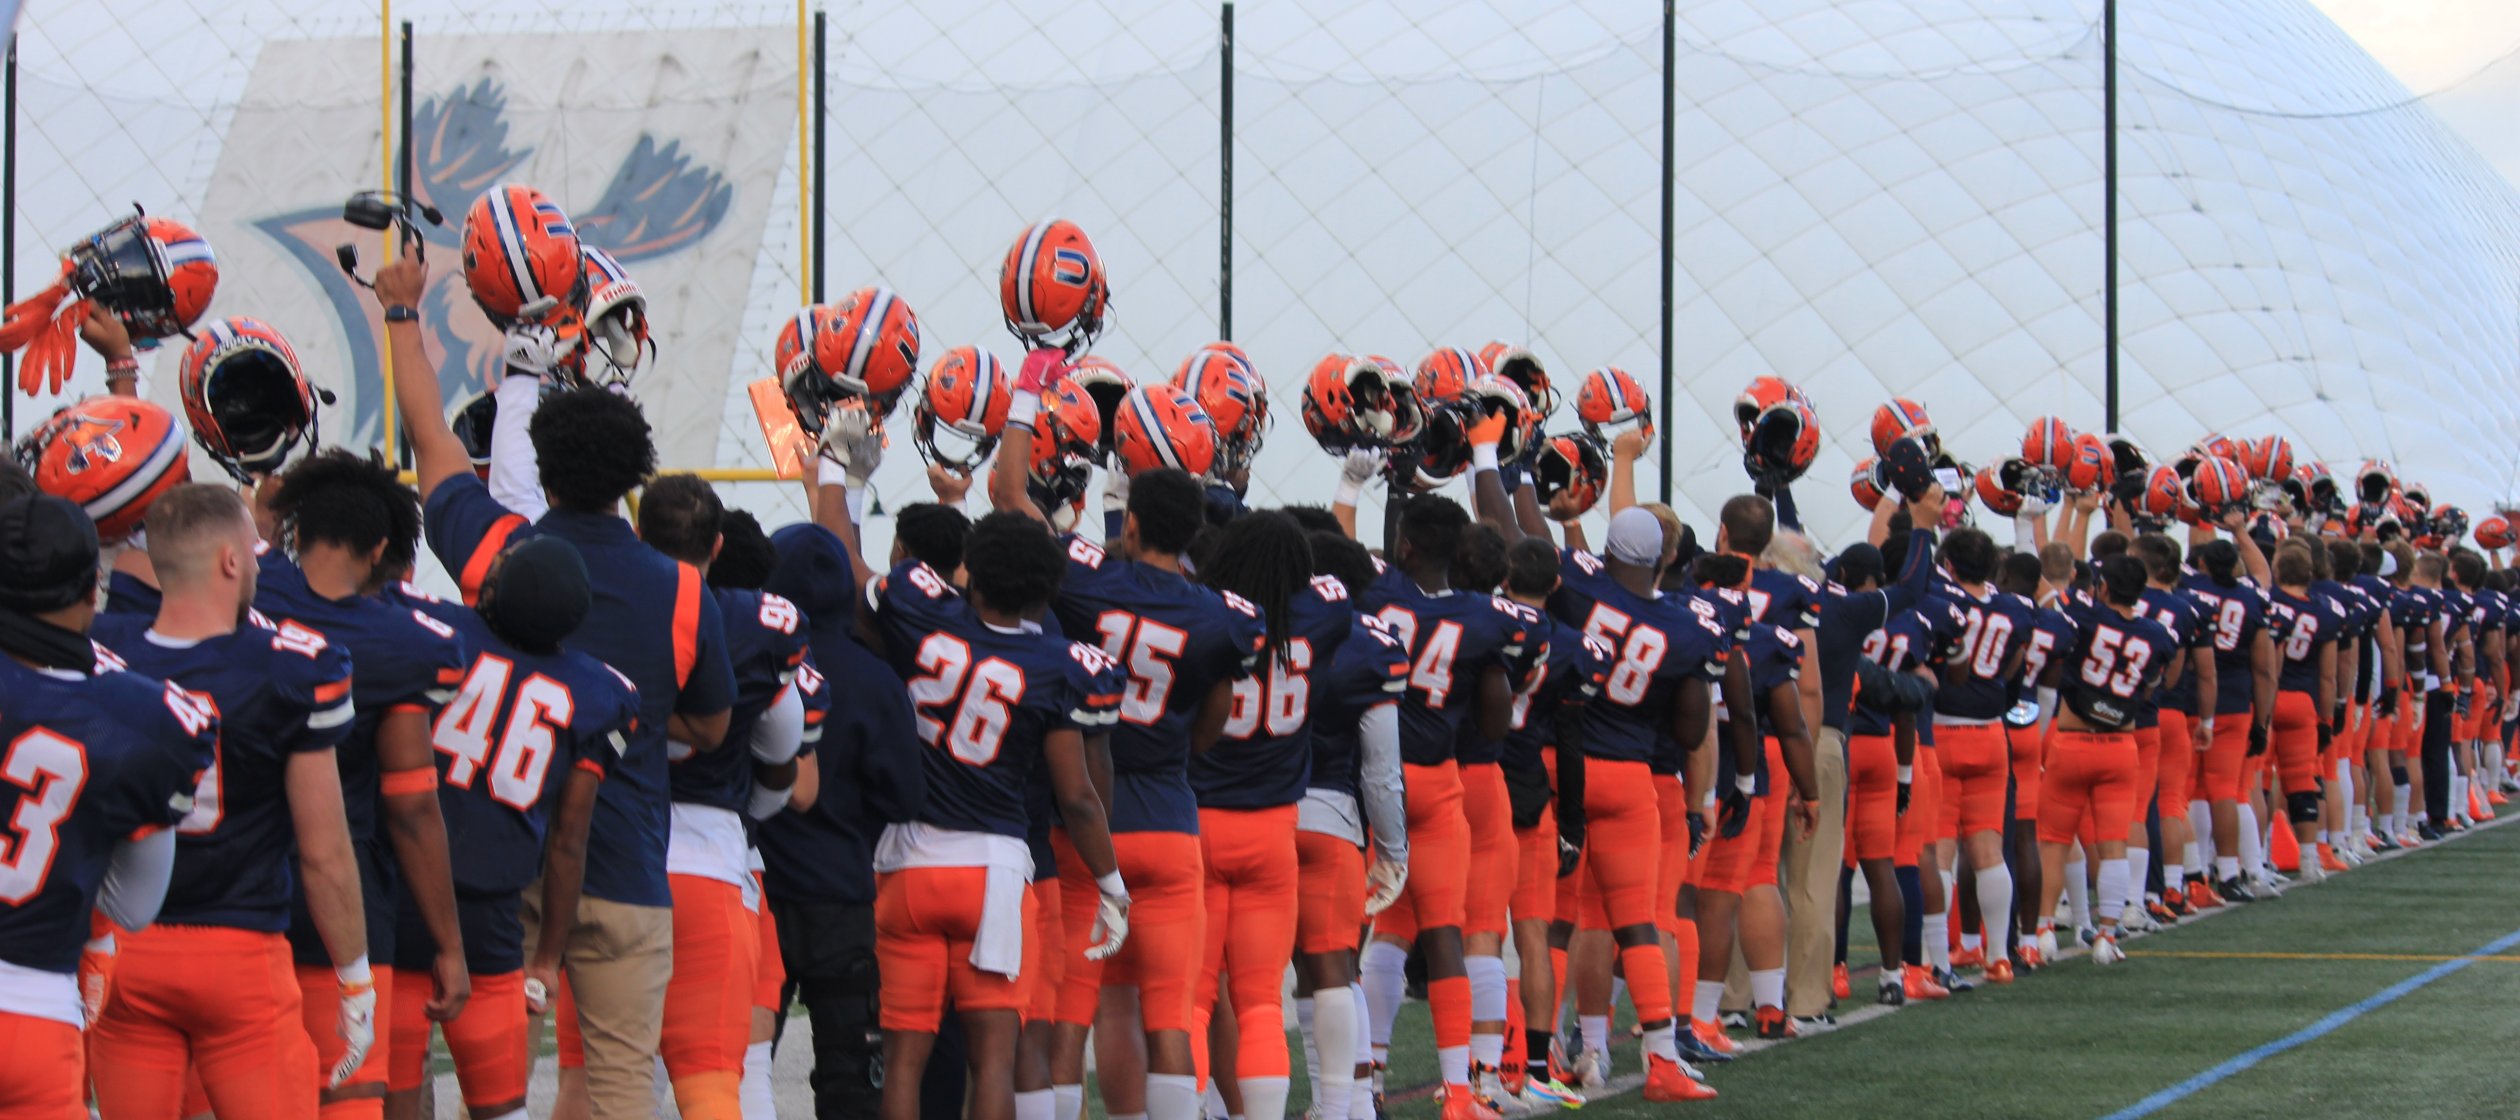 Members of the football team stand on the field outside the dome, holding their helmets up in the air.